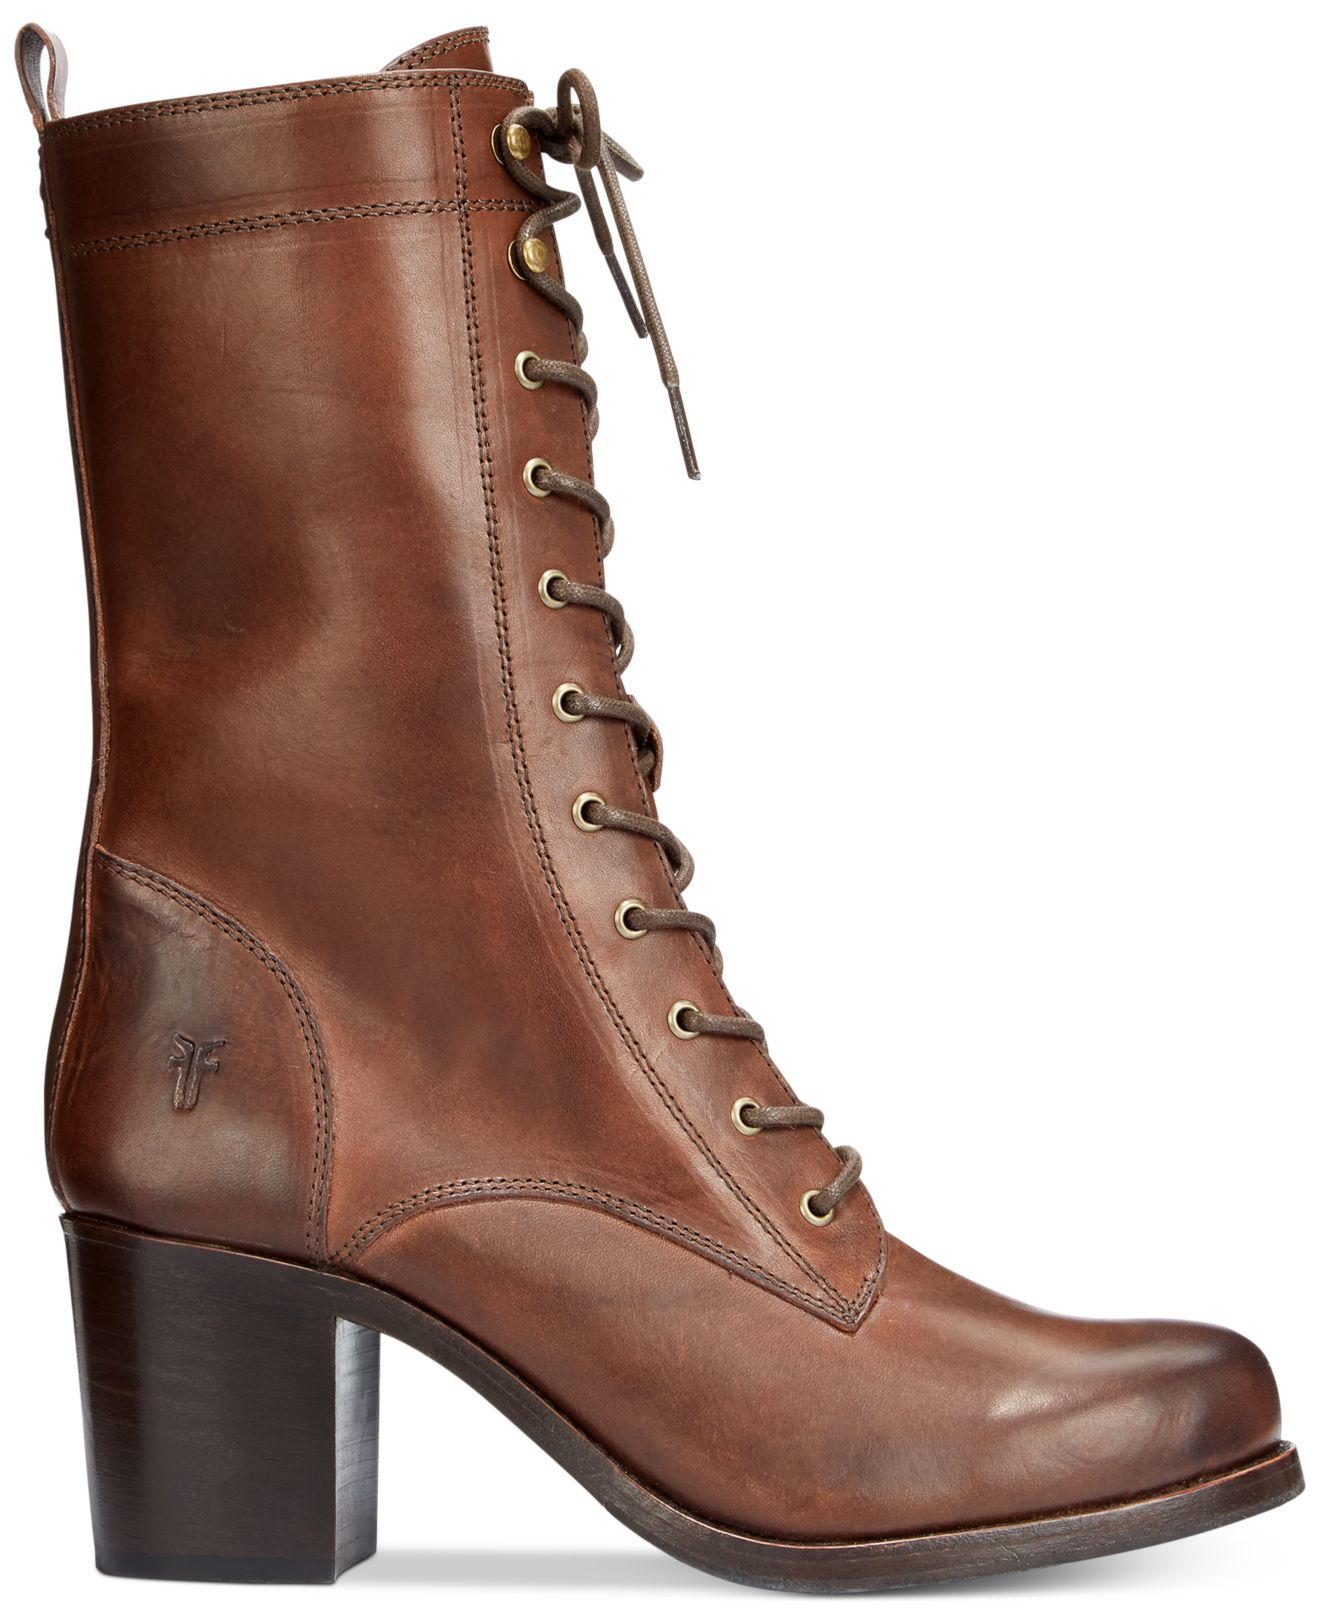 Frye Kendall Lace-up Boots in Dark 